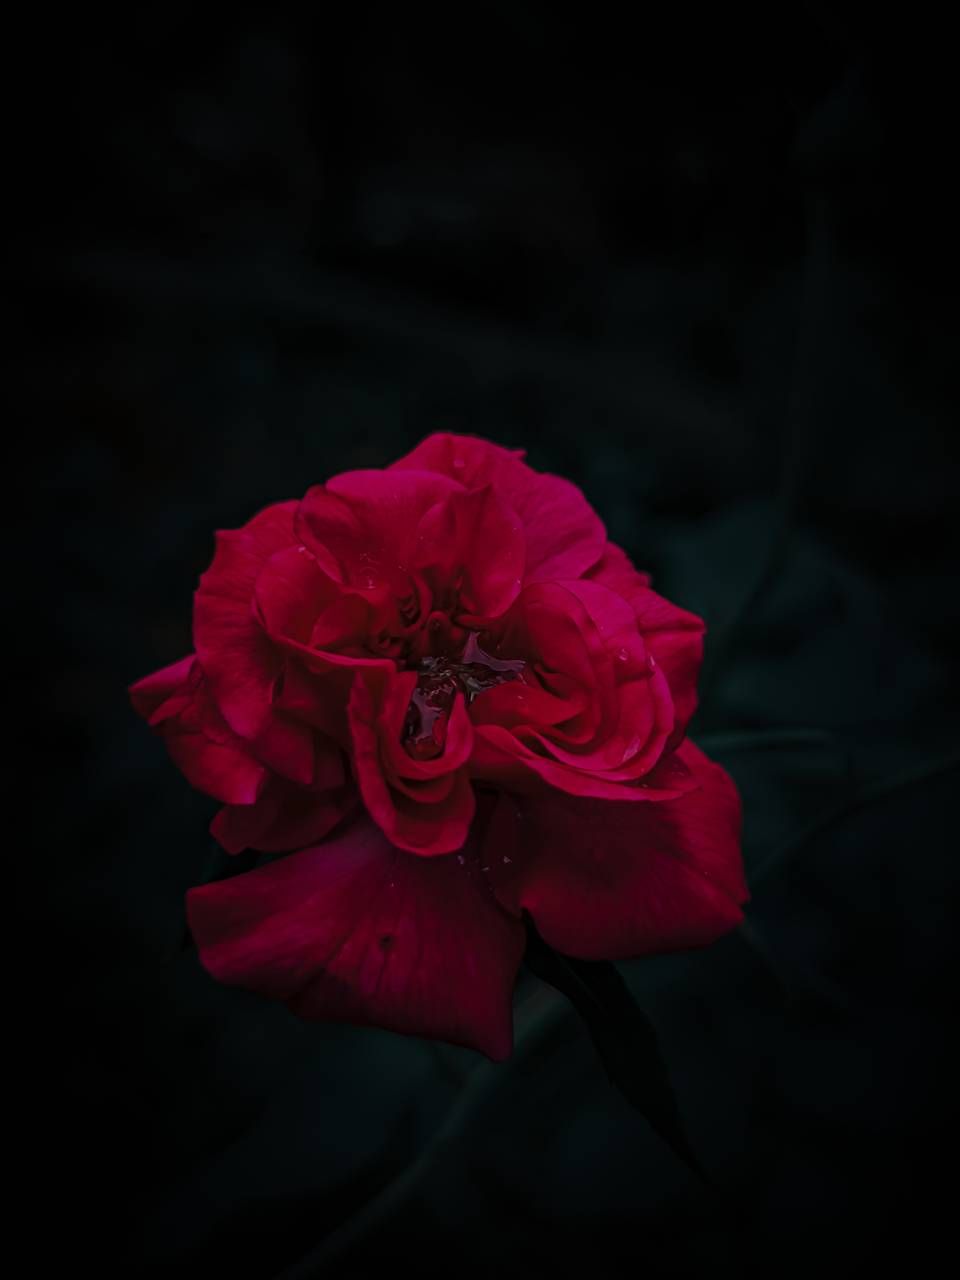 Amoled Red rose wallpaper by .zedge.net